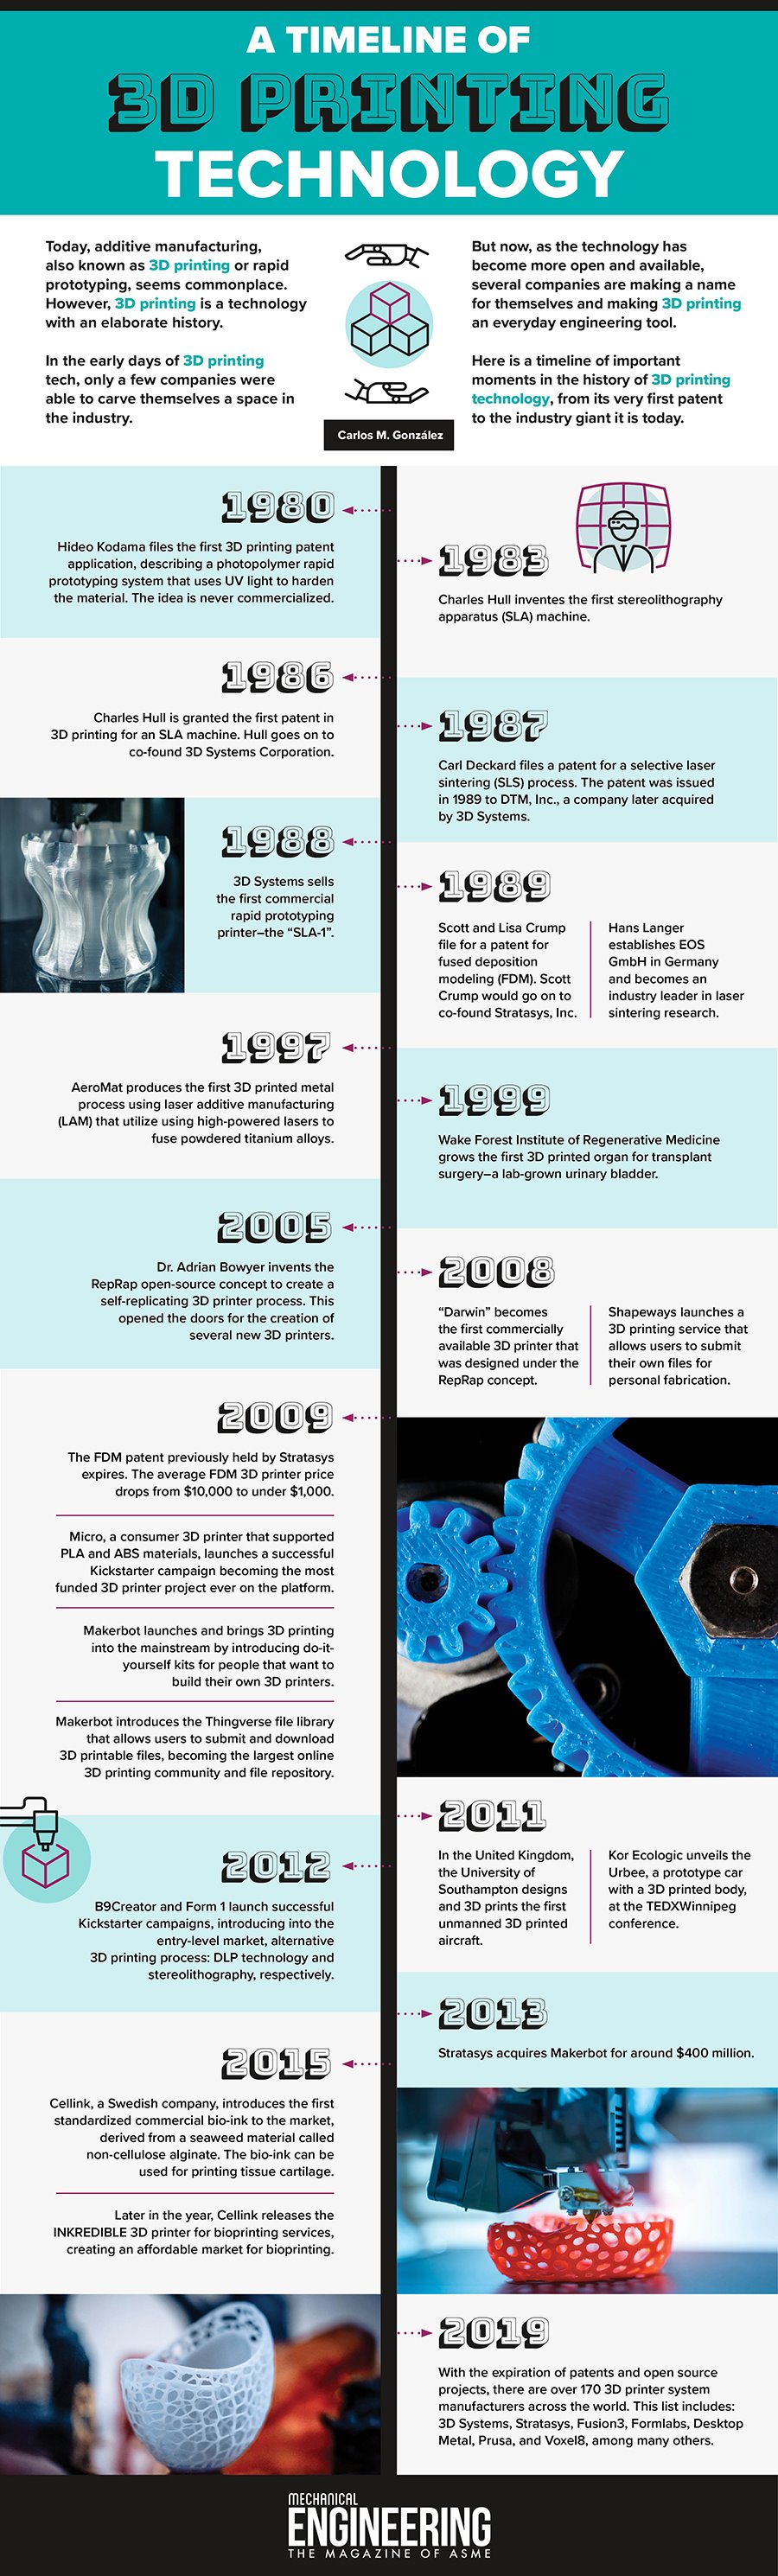 timeline-of-the-3d-printing-history-asme